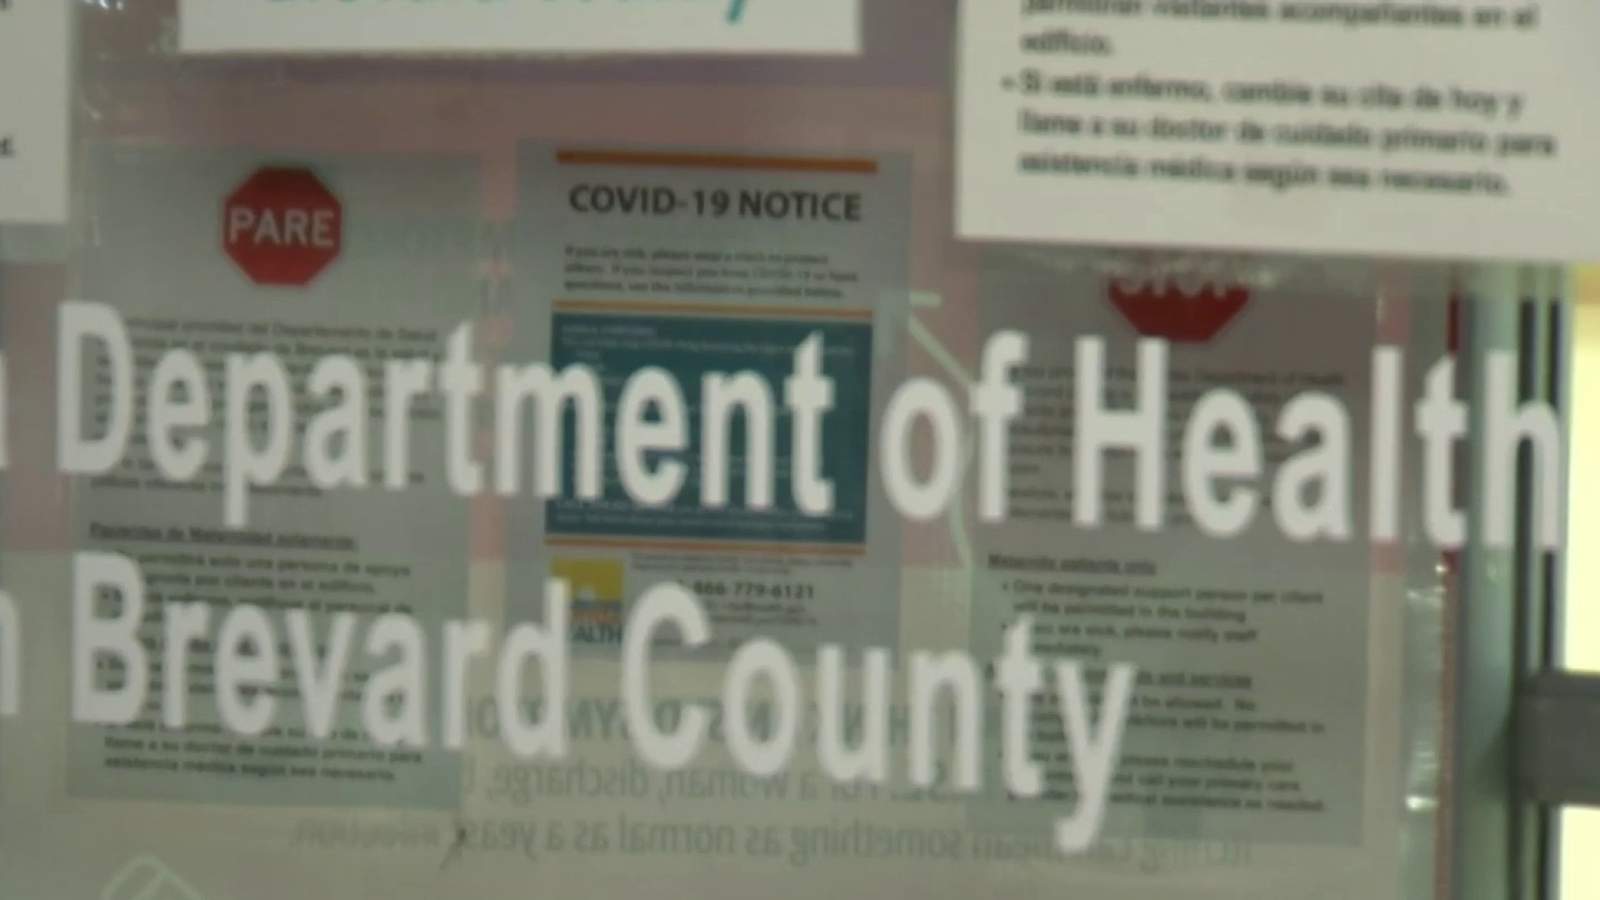 ‘You need to stay at home:’ Brevard shares coronavirus update amid statewide order